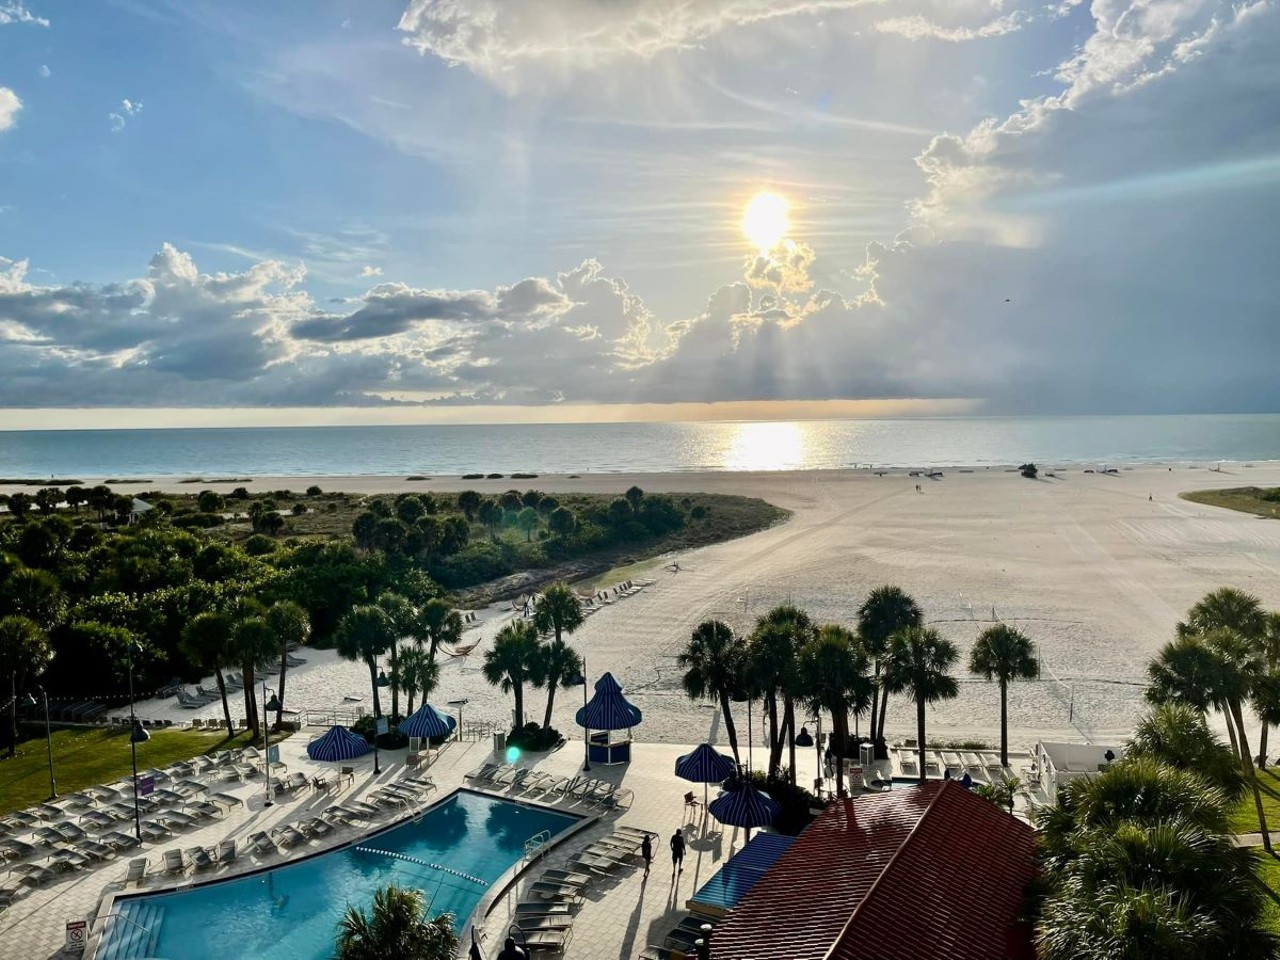 Sheraton Sand Key Resort
1160 Gulf Blvd, Clearwater Beach, 727-595-1611    
$35-$180
The Sheraton Sand Key Resort day pass comes with beach access in addition to its pool and hot tub. Get your fixins at the Poolside Cafe and/or Turtle Bar. Plus, for an additional $20, the resort will throw in lunch from the cafe plus one beverage. The Couple’s Beach Pass ($100) and Family Beach Pass ($180) have all the same amenities plus two and four reserved beach chairs respectively. Daily parking is $25. 
Photo via Sheraton Sand Key Resort/Facebook